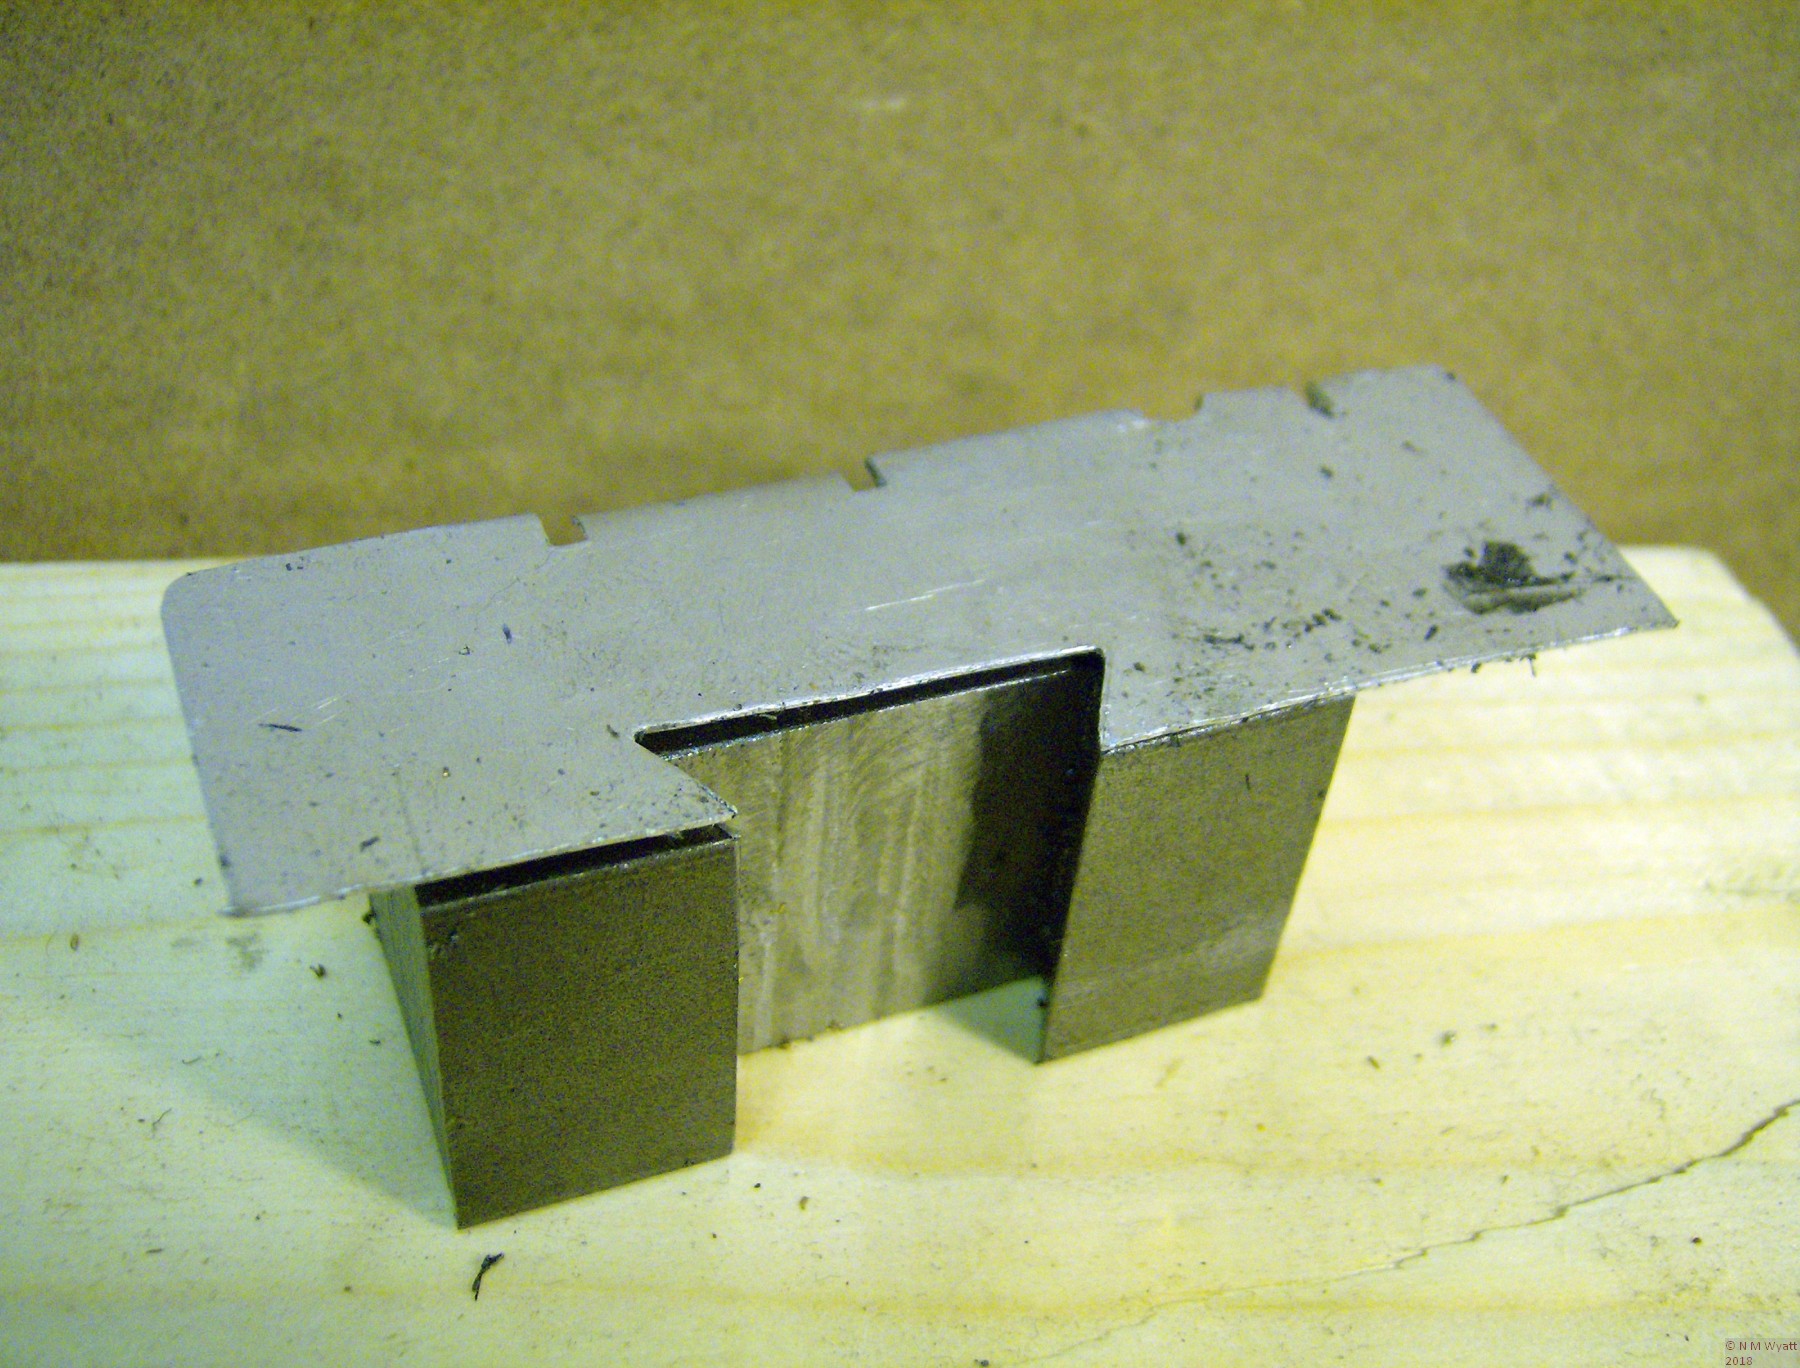 The dovetail template